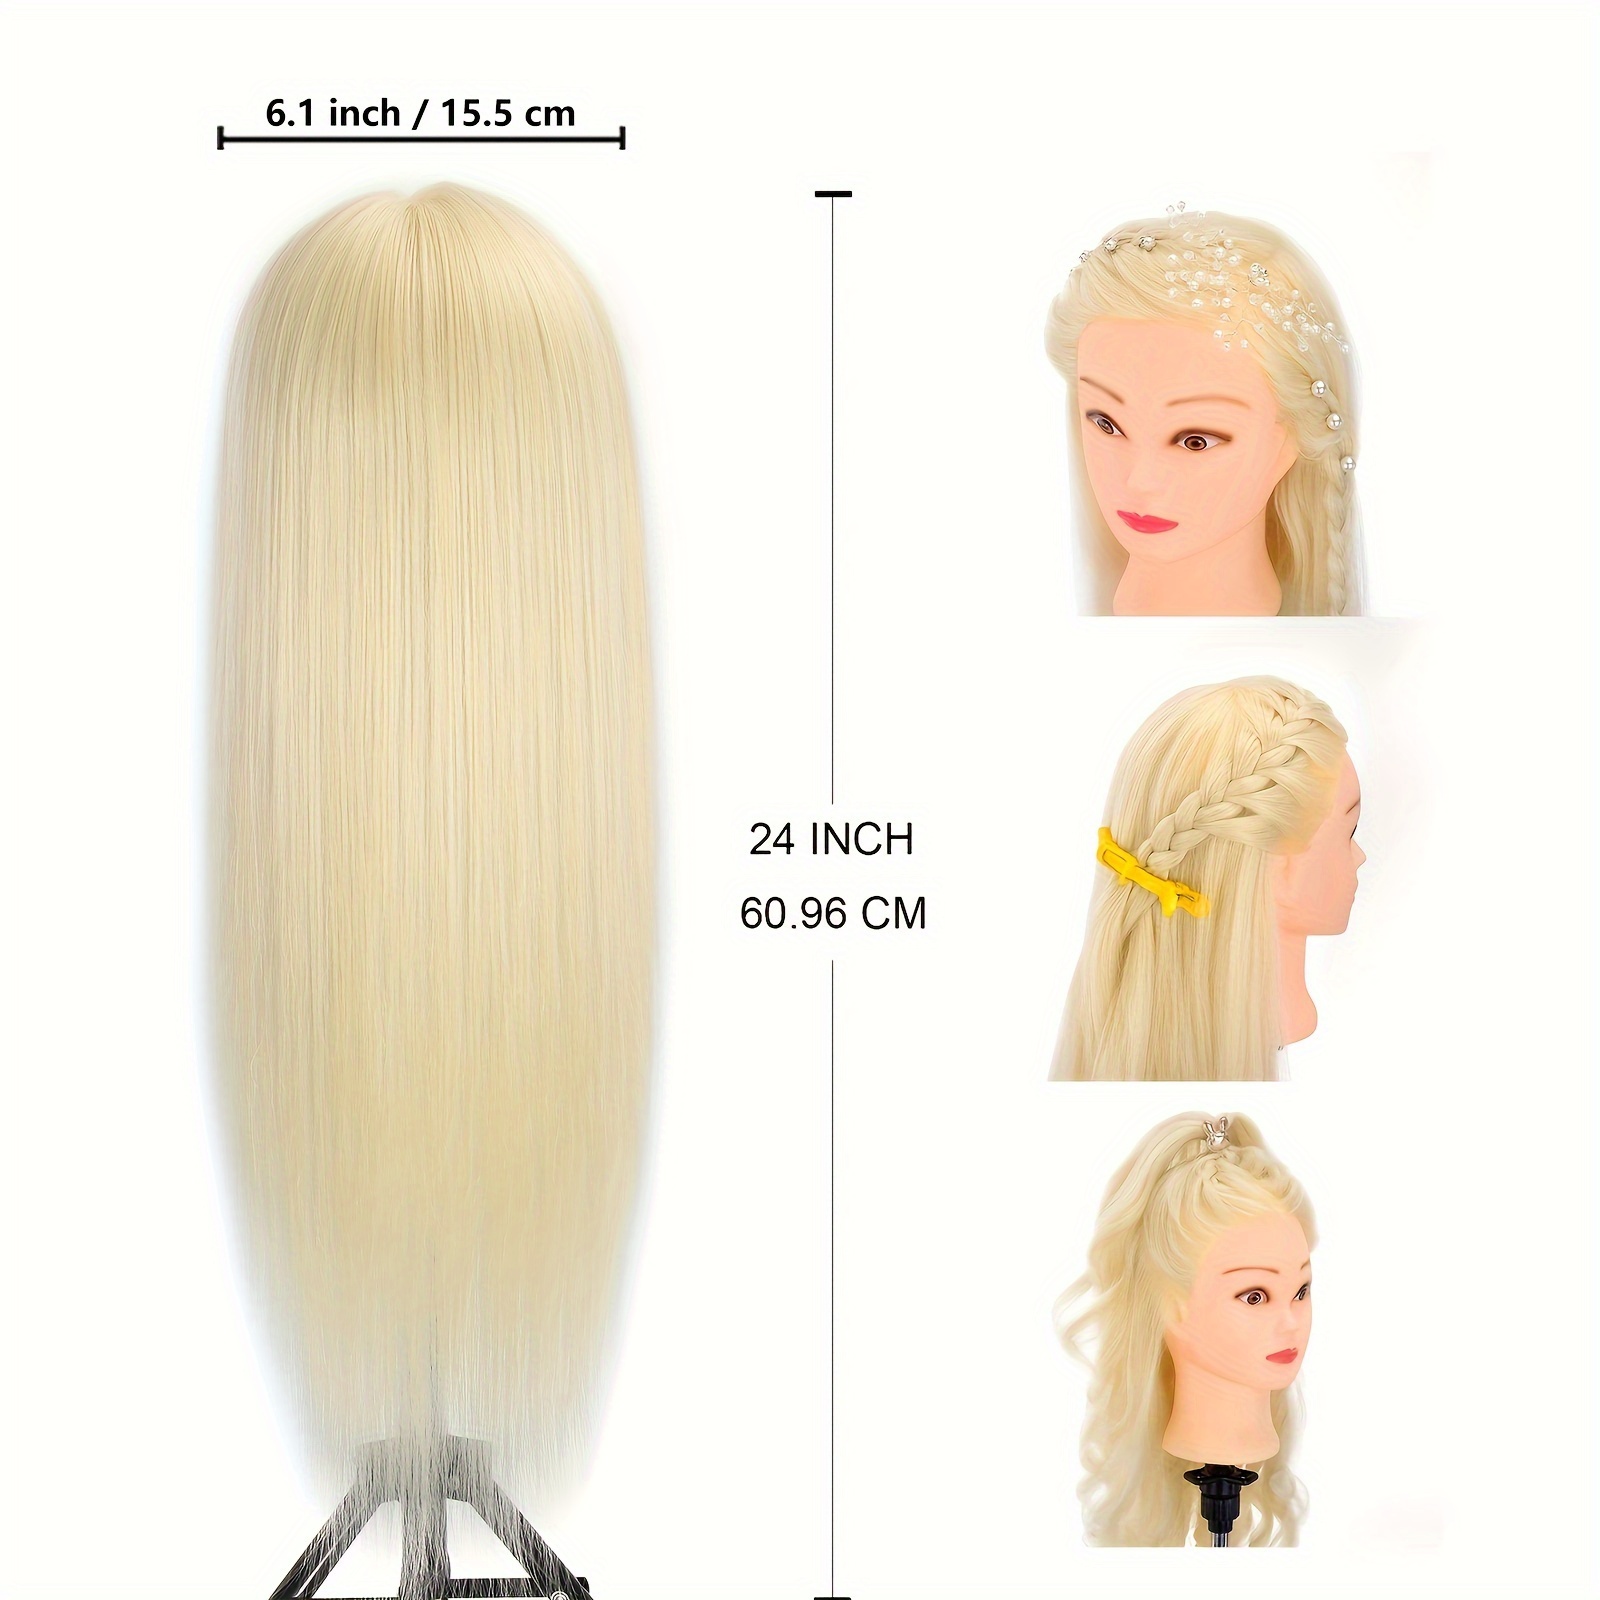 70% Real Hair Doll Head For Hairstyle Curling Straighten Practice 66cm  Braid Hairdressing Training Mannequin Head Hair Doll Head - AliExpress